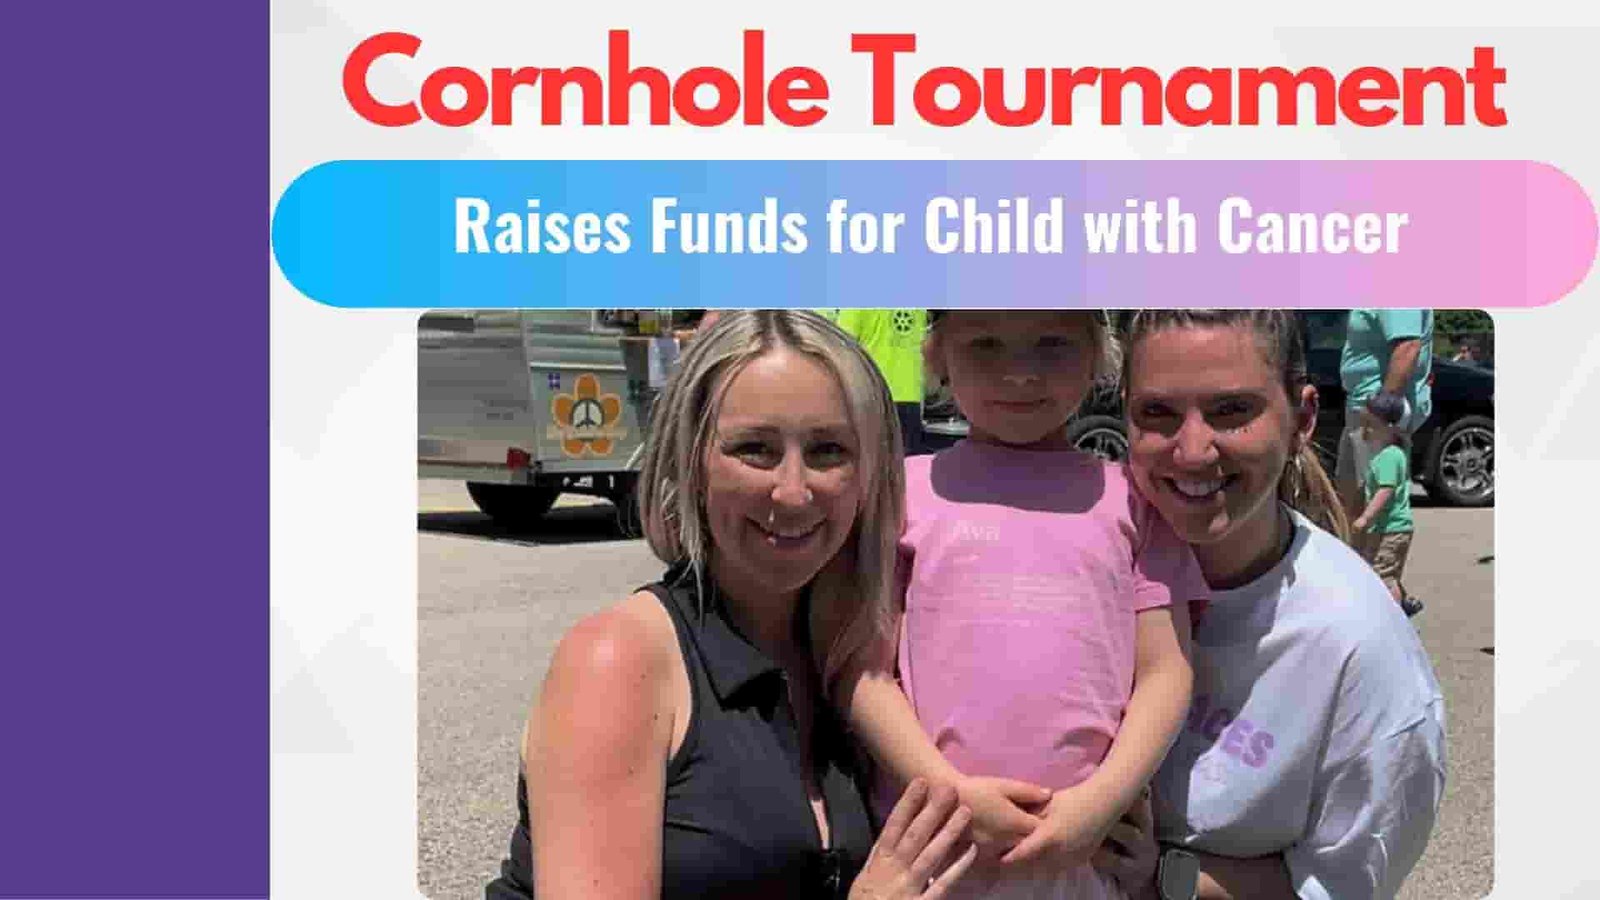 Cornhole Tournament Raises Funds for Child with Cancer